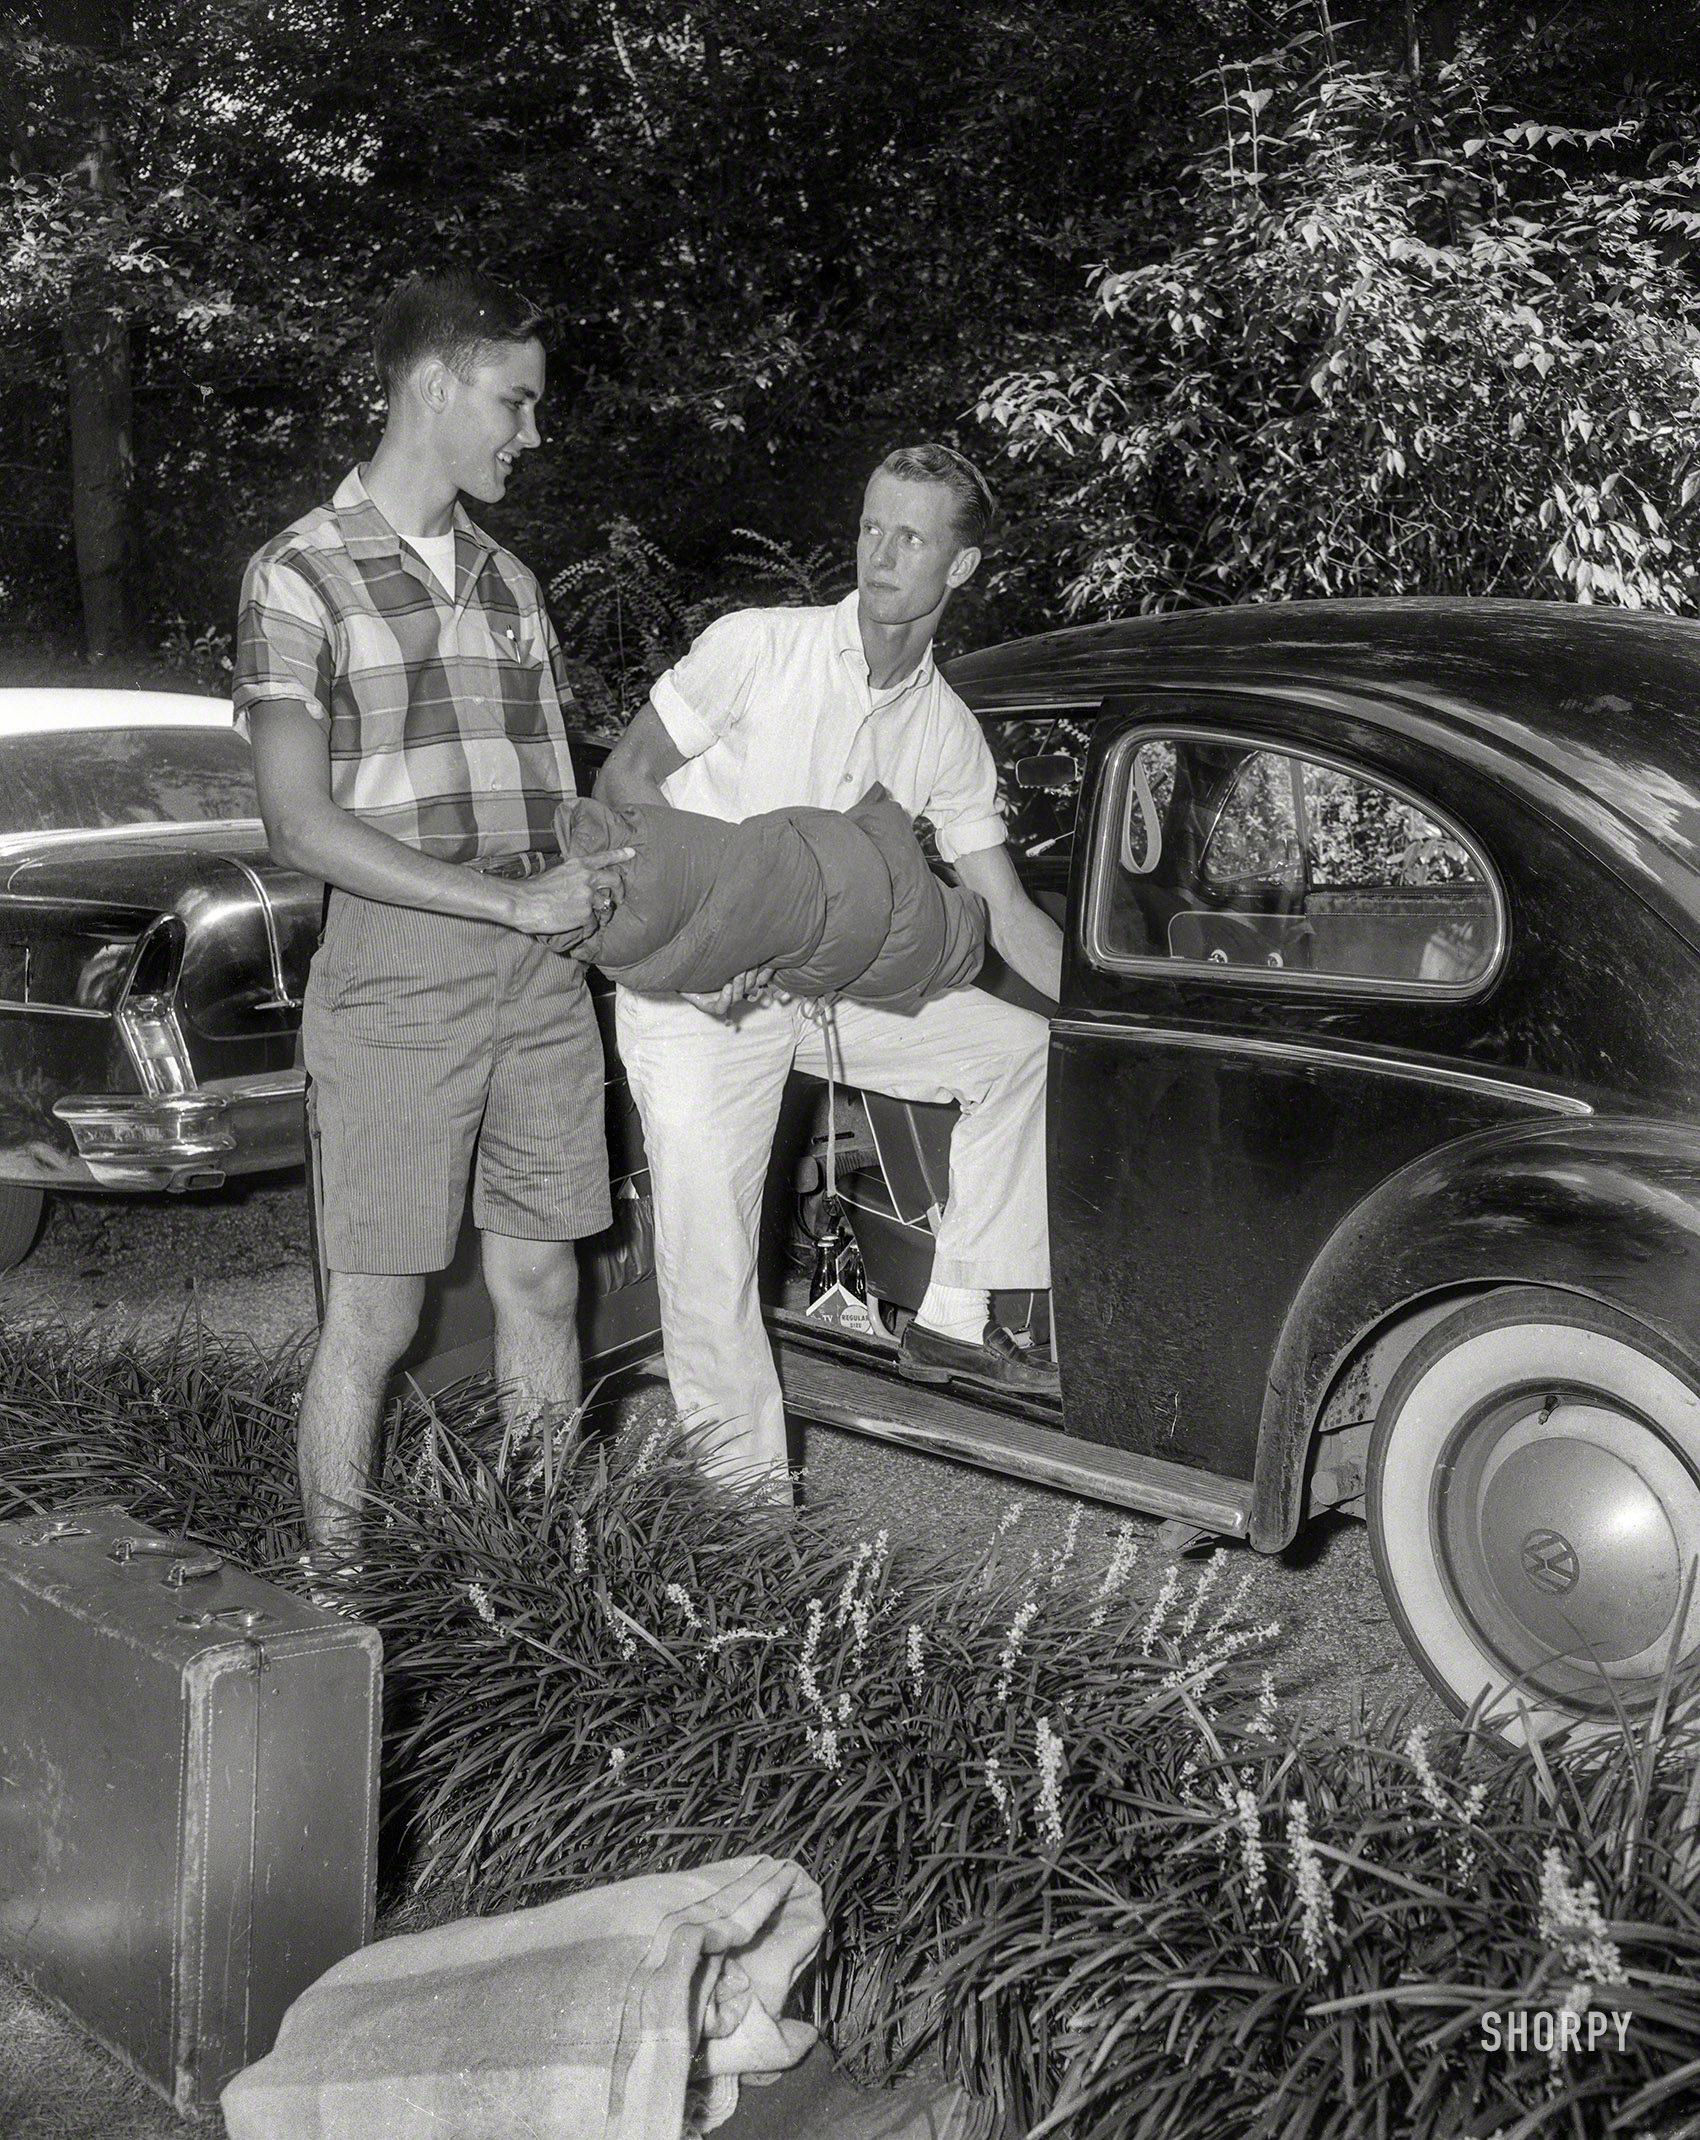 From Columbus, Georgia, circa 1957 comes this uncaptioned shot of two guys about to go somewhere. Cola? Check. Bedroll? Ditto. Daddy's Roadmaster? All gassed up. 4x5 inch acetate negative from the Shorpy News Photo Archive. View full size.